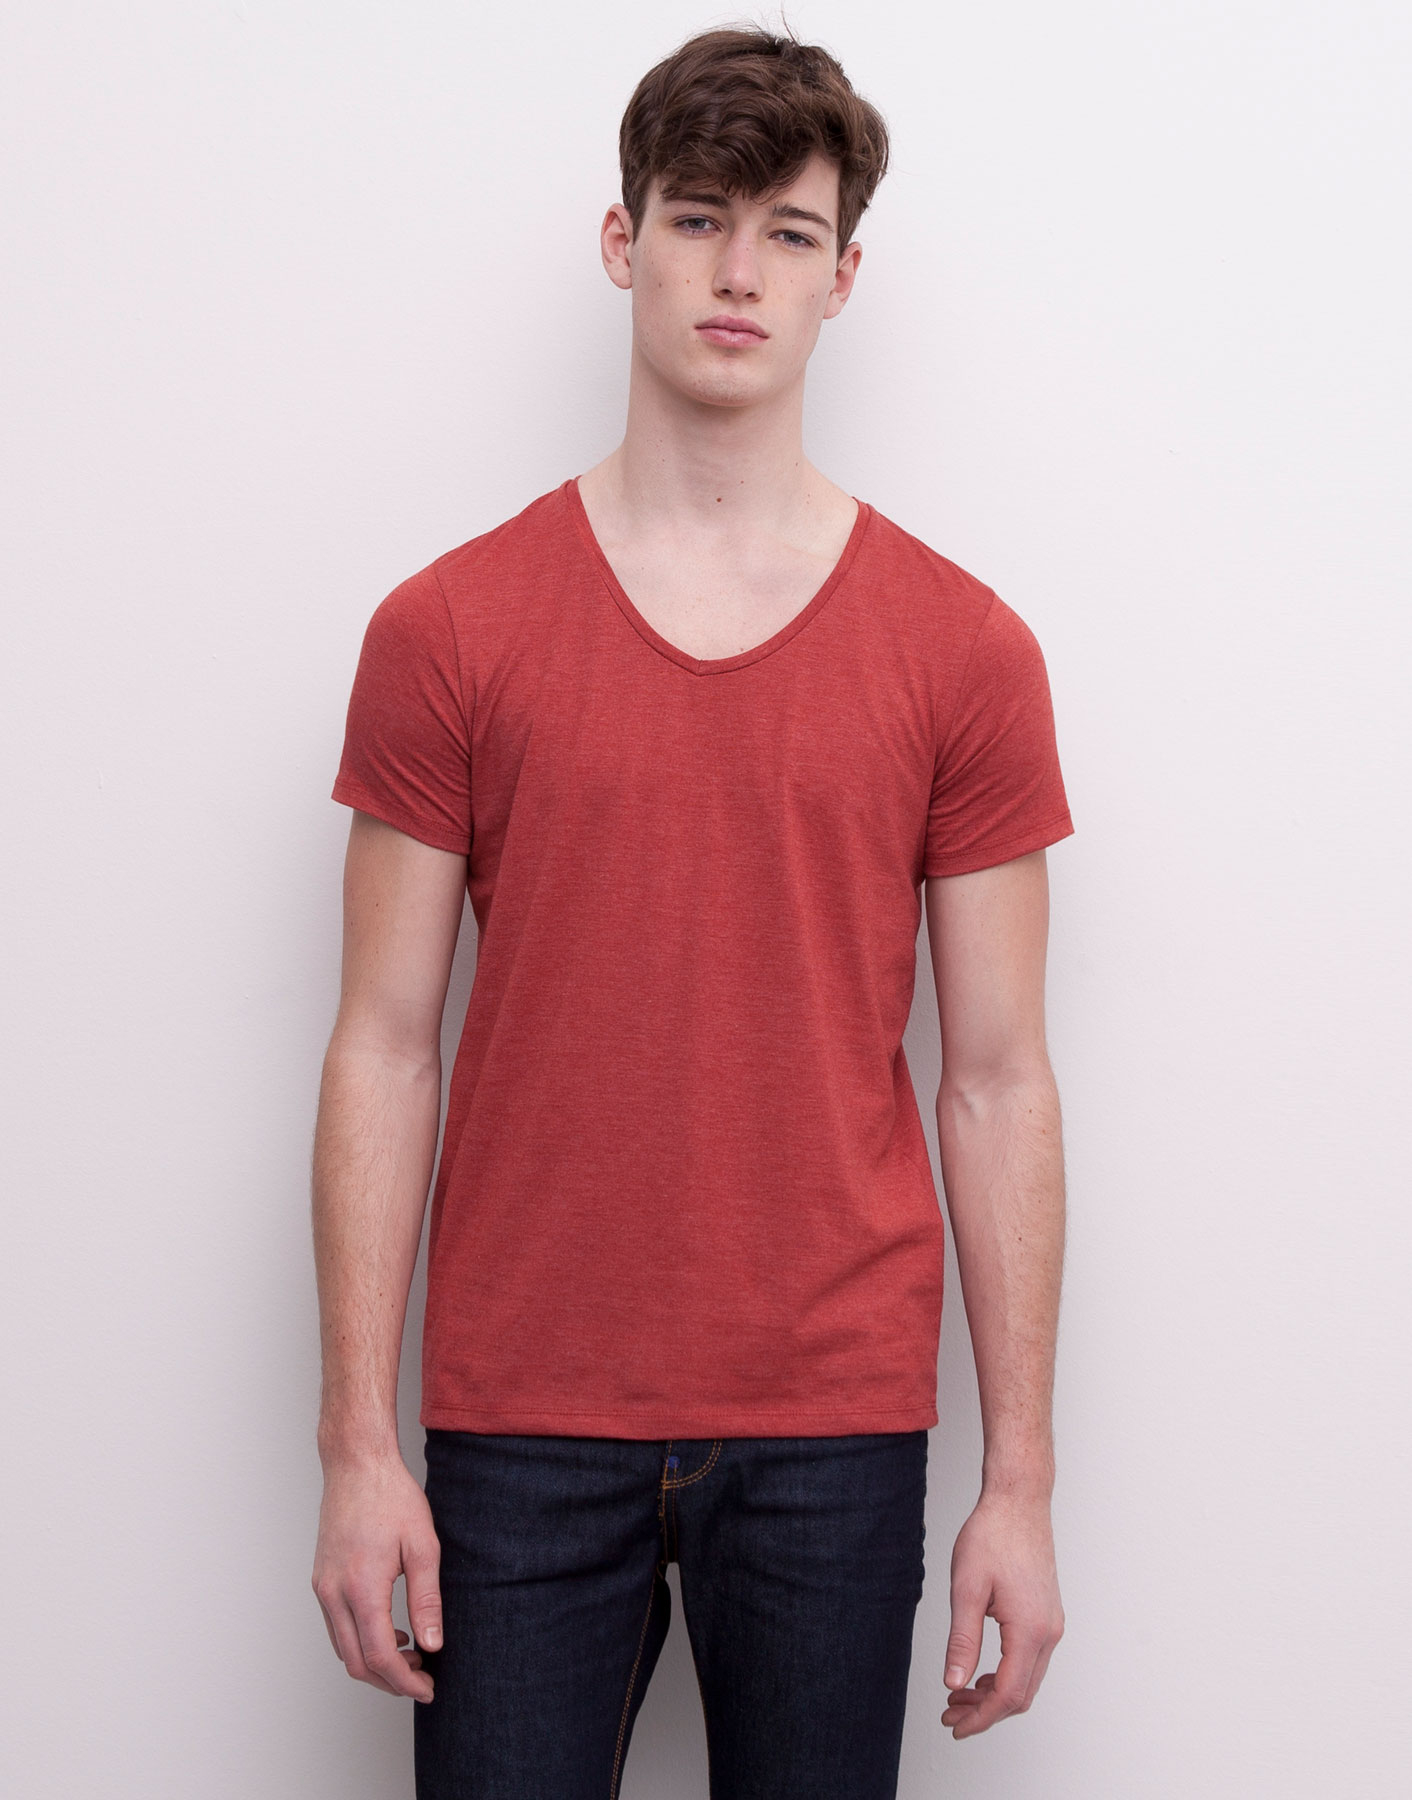 Pull and bear v neck t shirt japan germany online